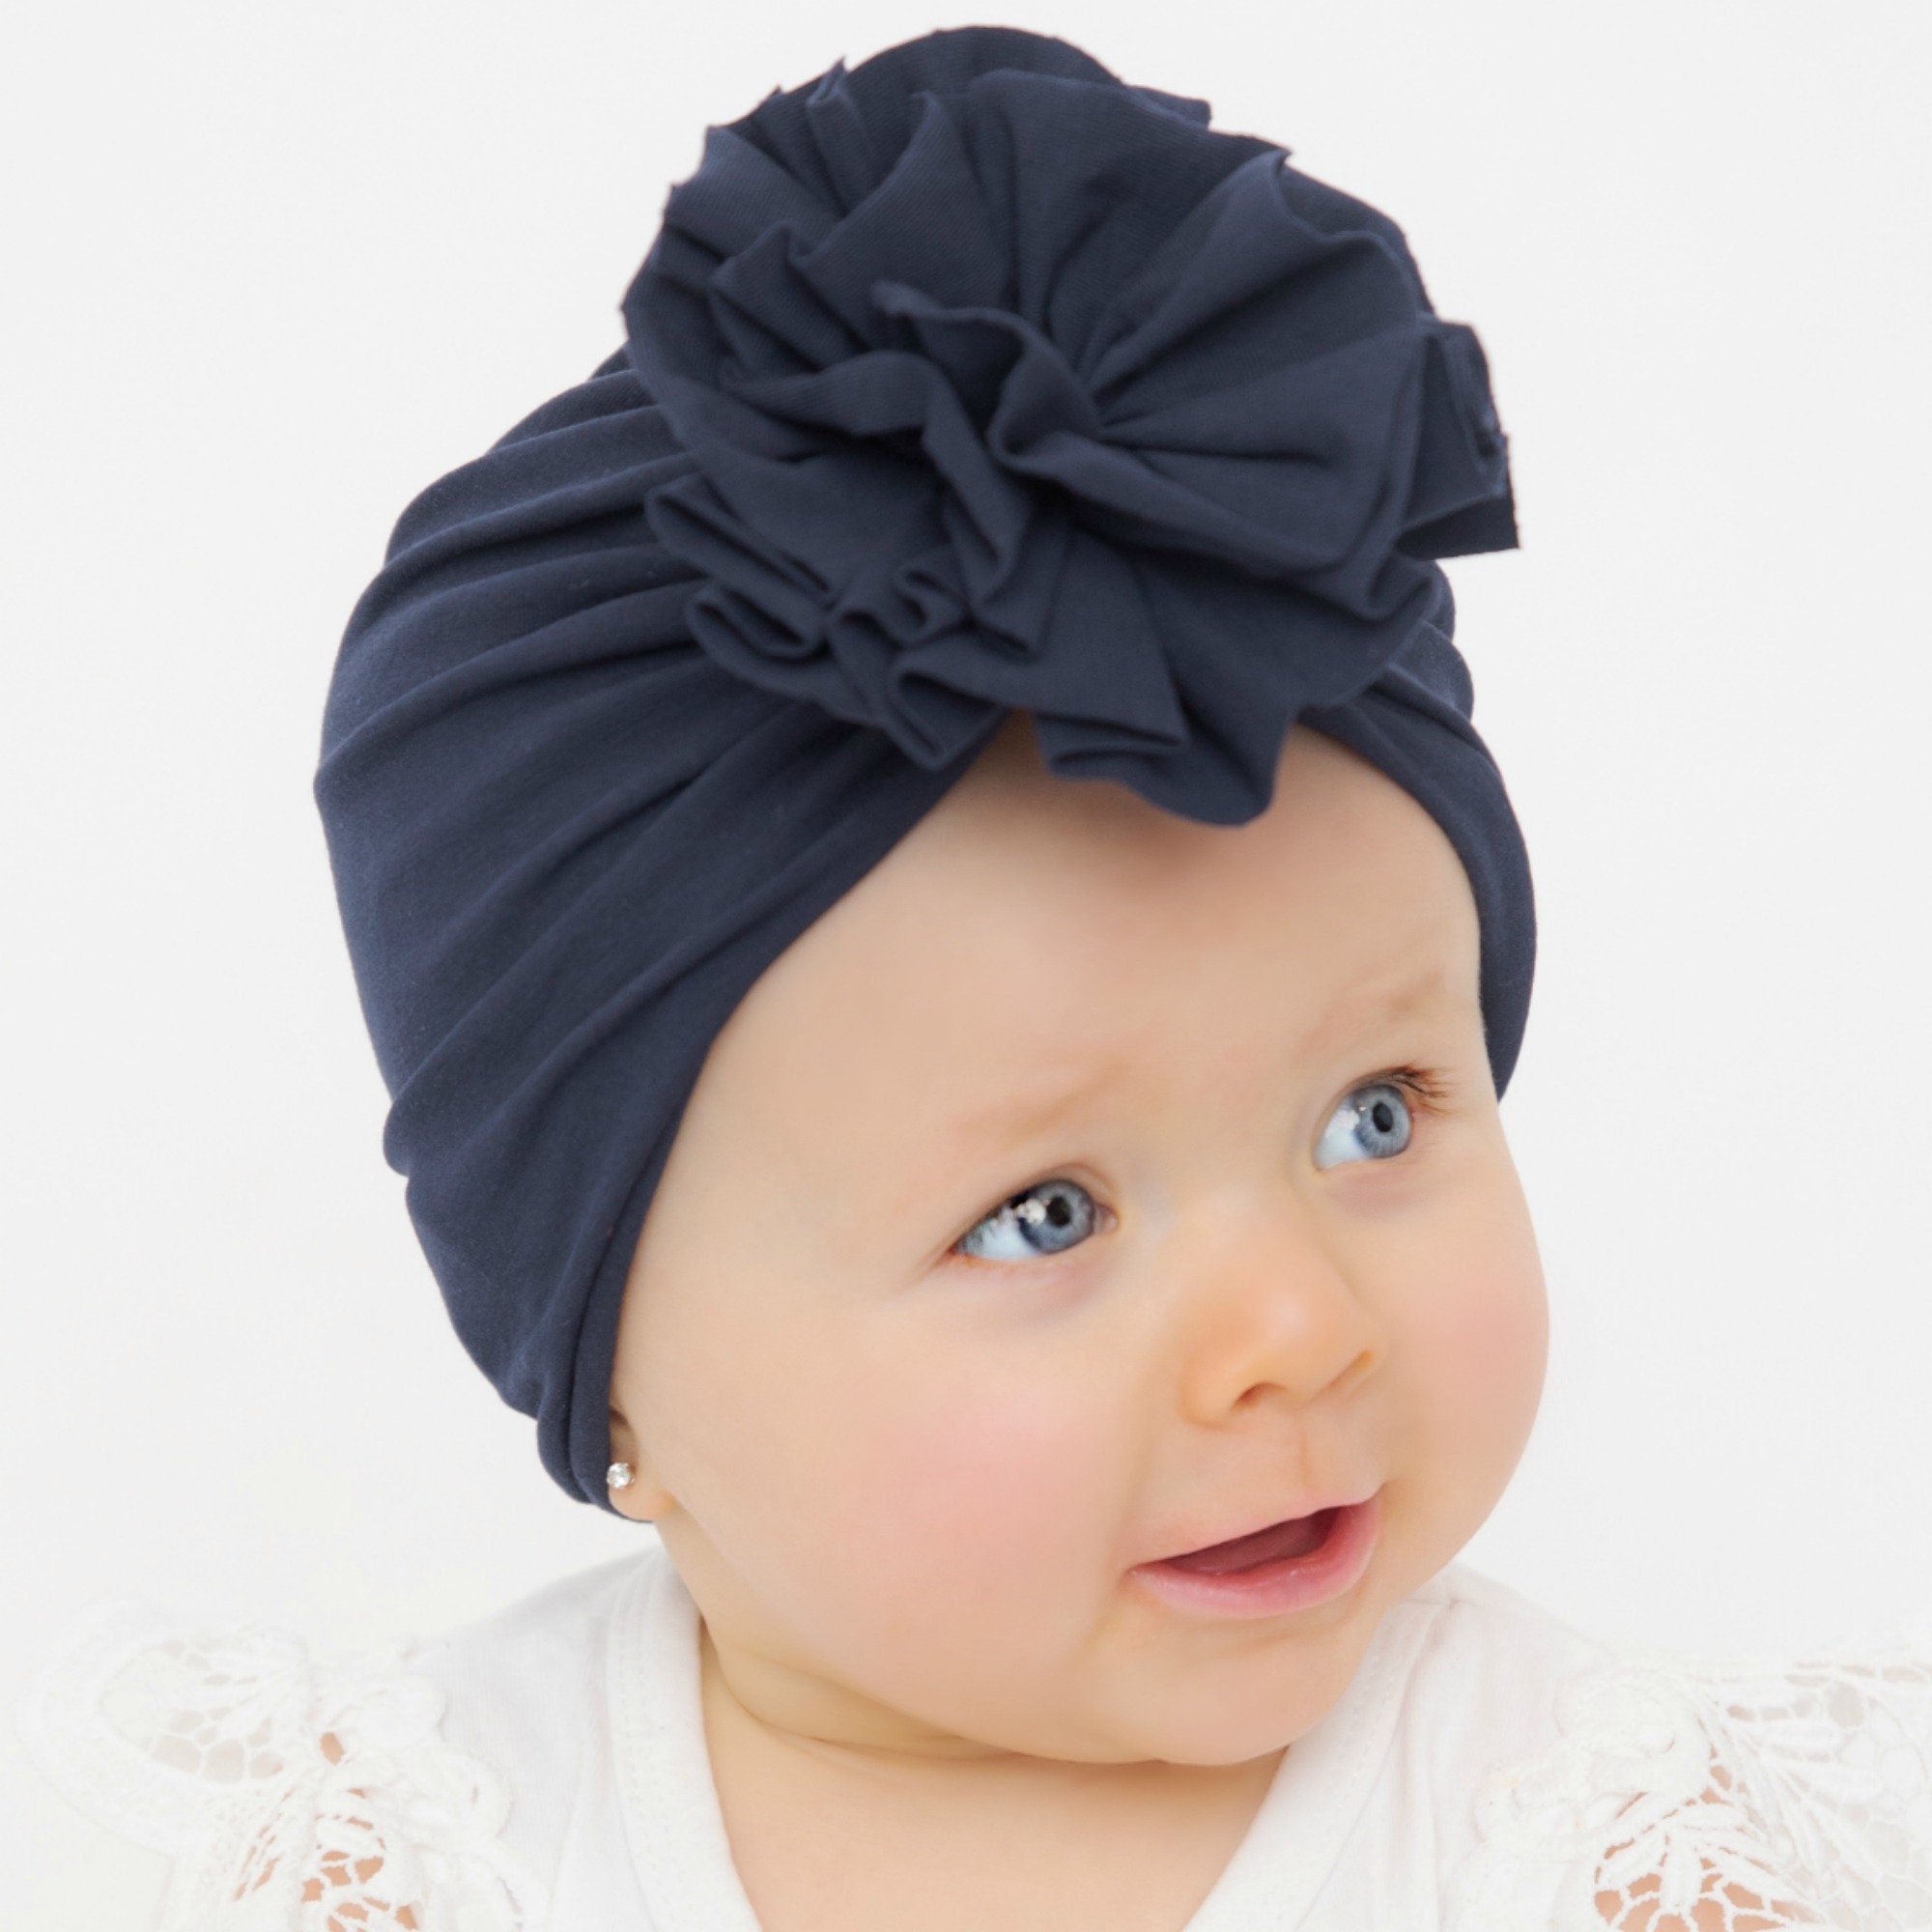 4 Pcs Baby Girls Knotted Turban Hats Floral Print Nursery Newborn Hospital Hat Cap with Big Bow Headwraps Hair Accessories For Baby Infant Toddler Mixed Color 